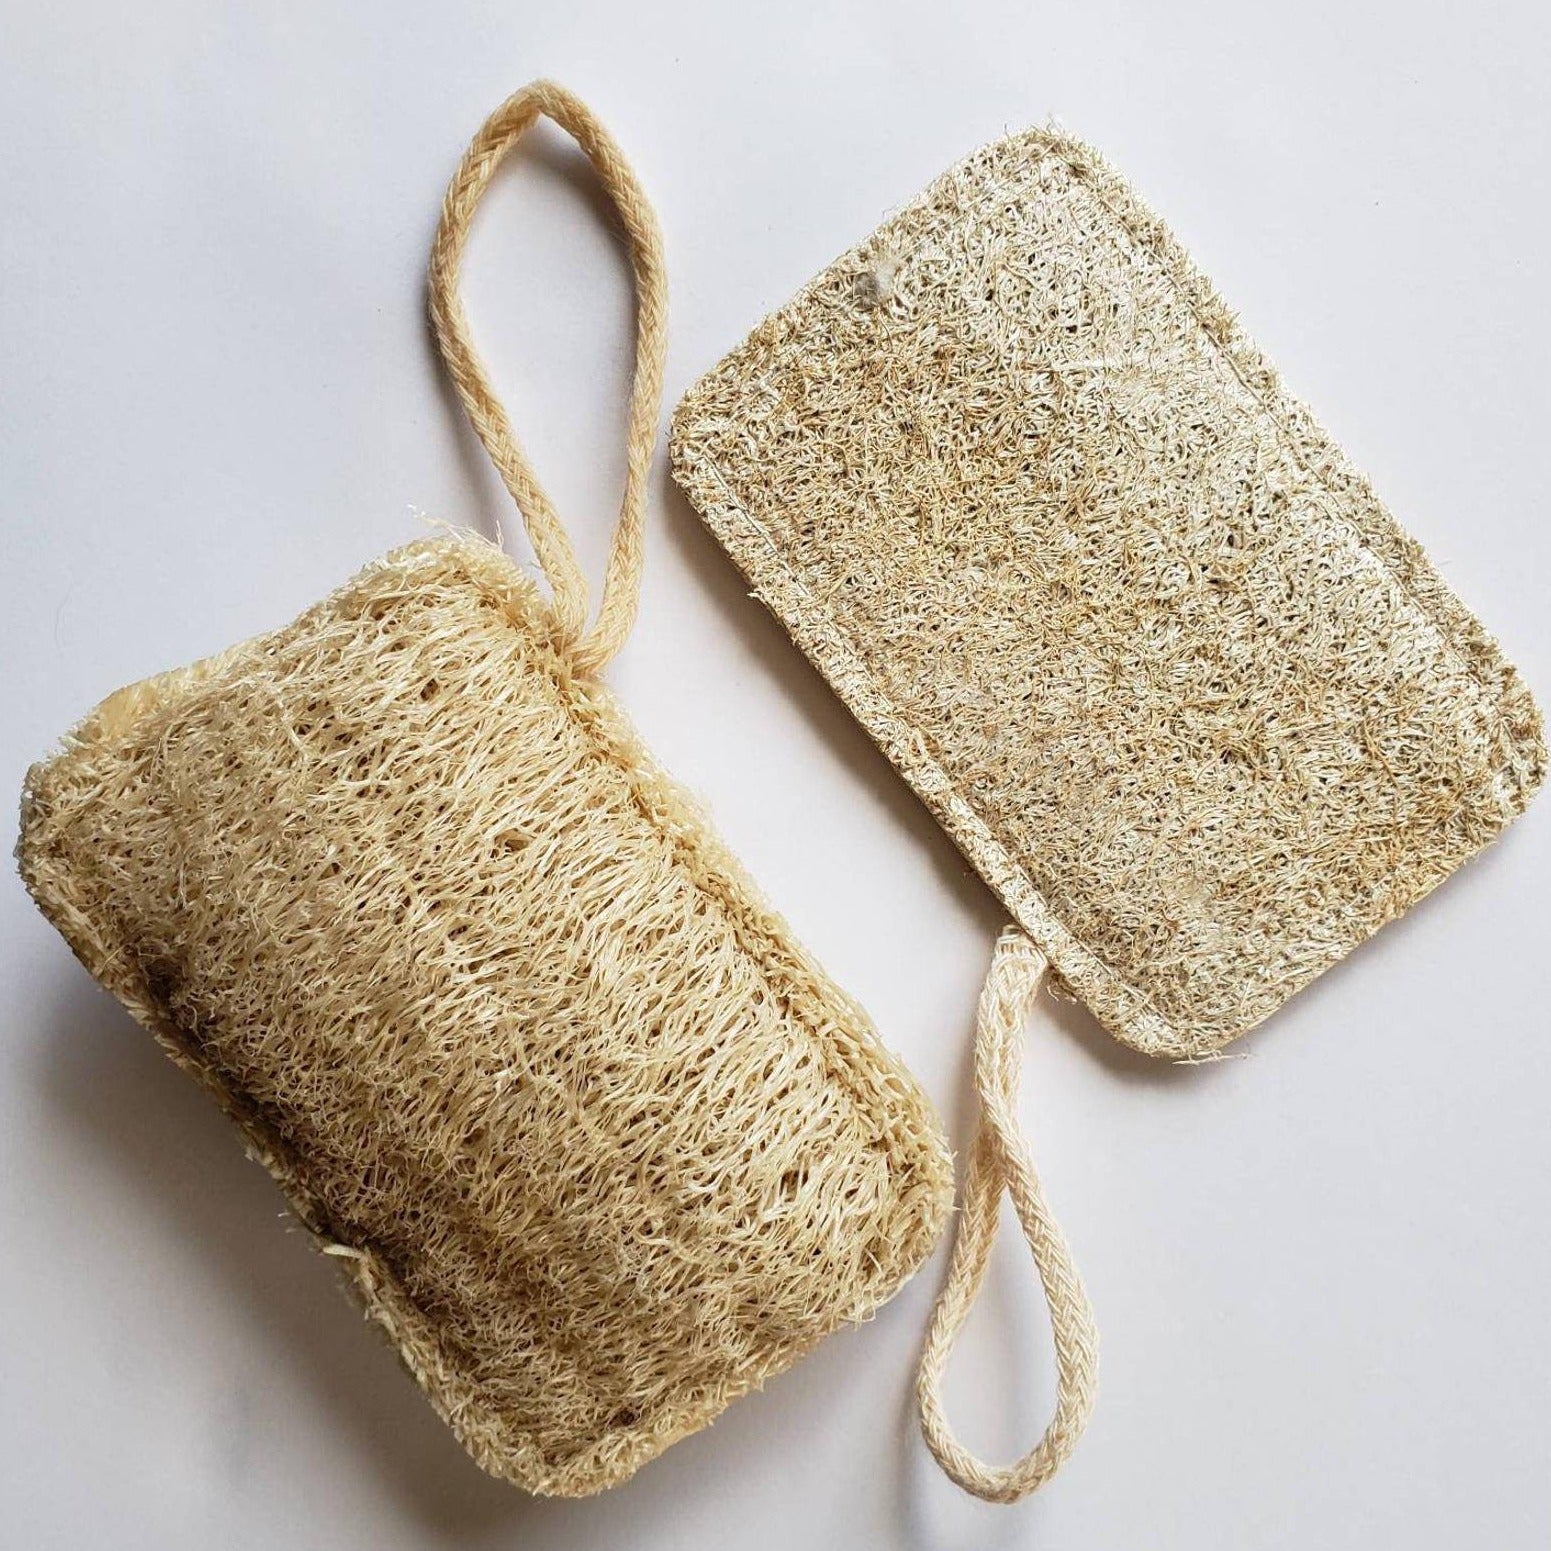 Natural Loofah Sponge on a String - The Mockingbird Apothecary & General Store